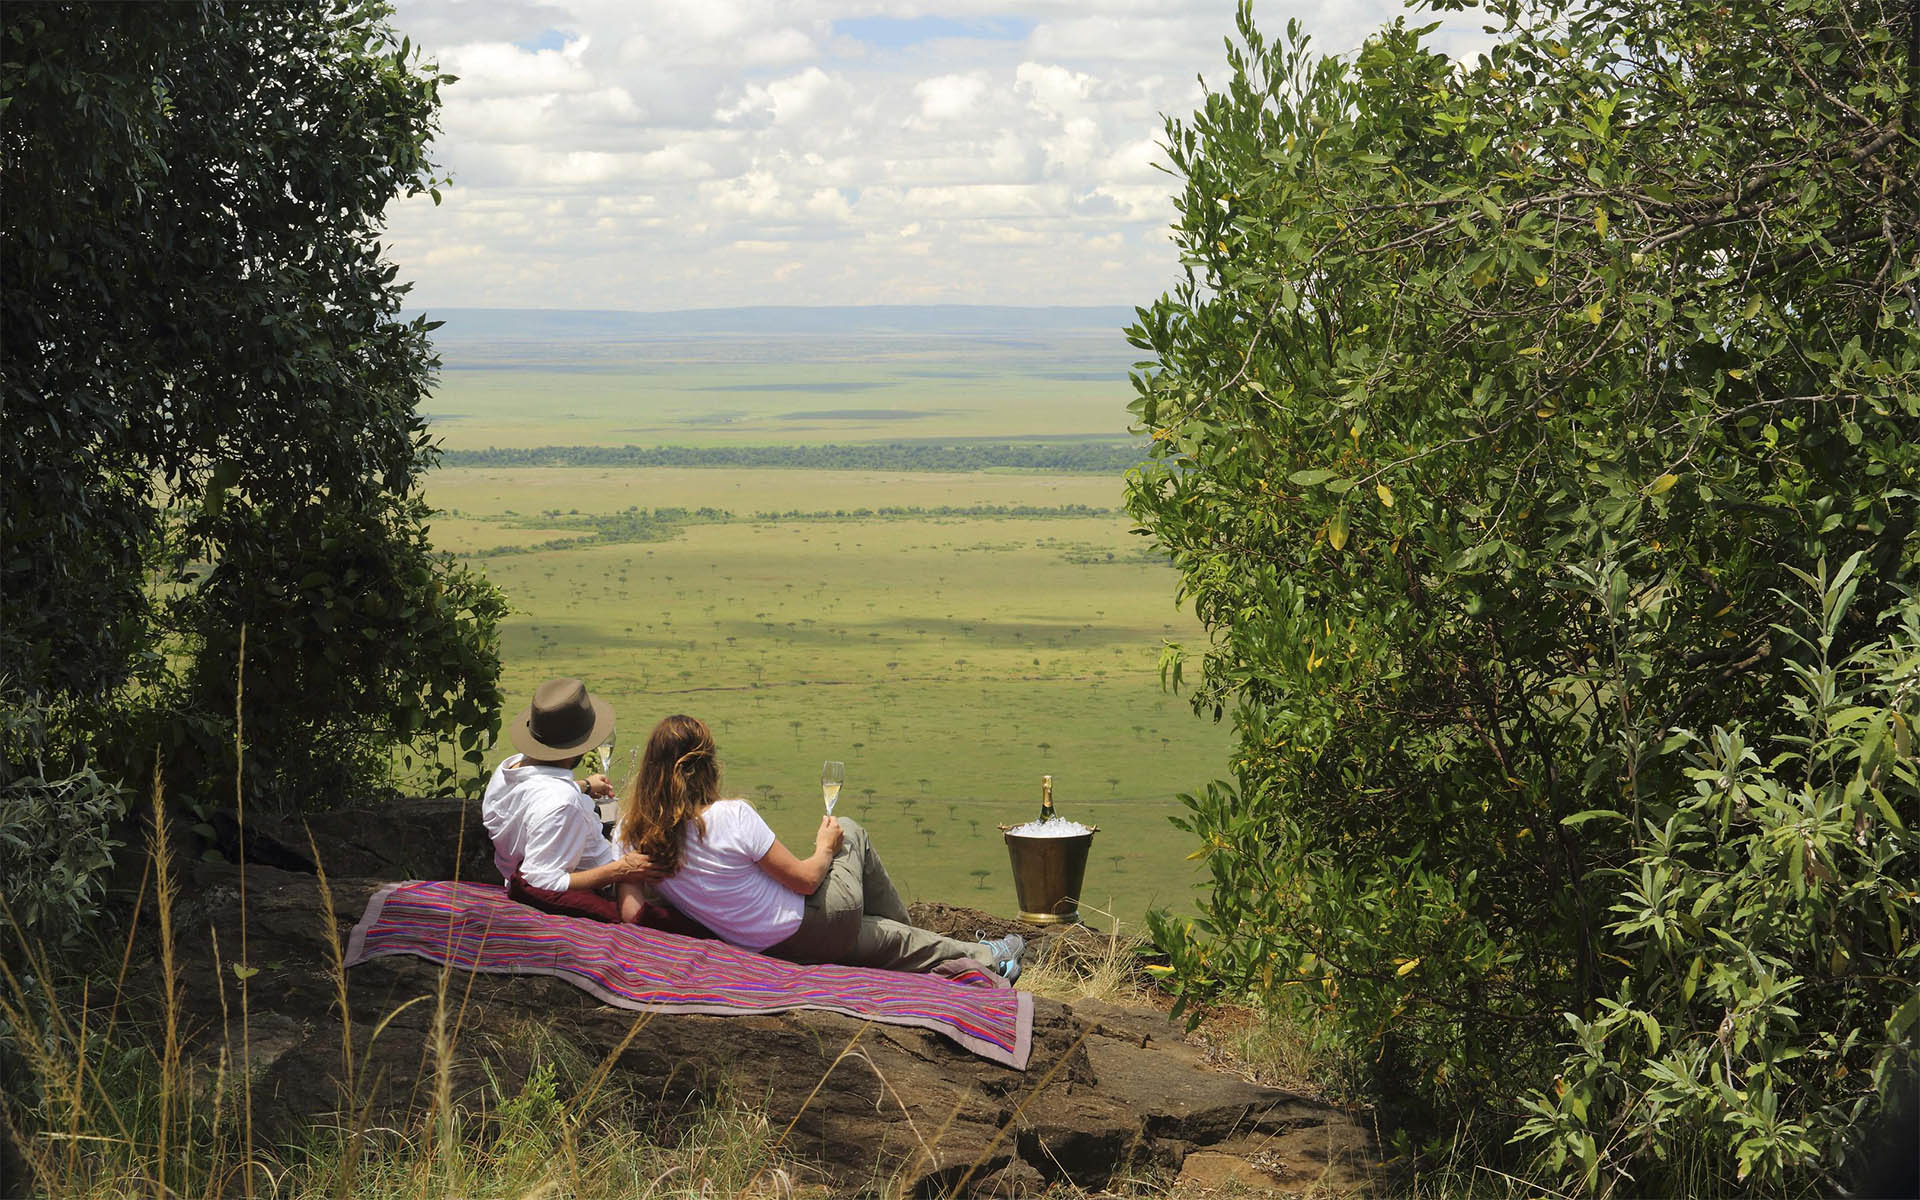 A romantic picnic on the crest of the ‘Out of Africa’ kopje at Angama Mara, part of Ker & Downey Africa’s best Africa safaris of 2022.